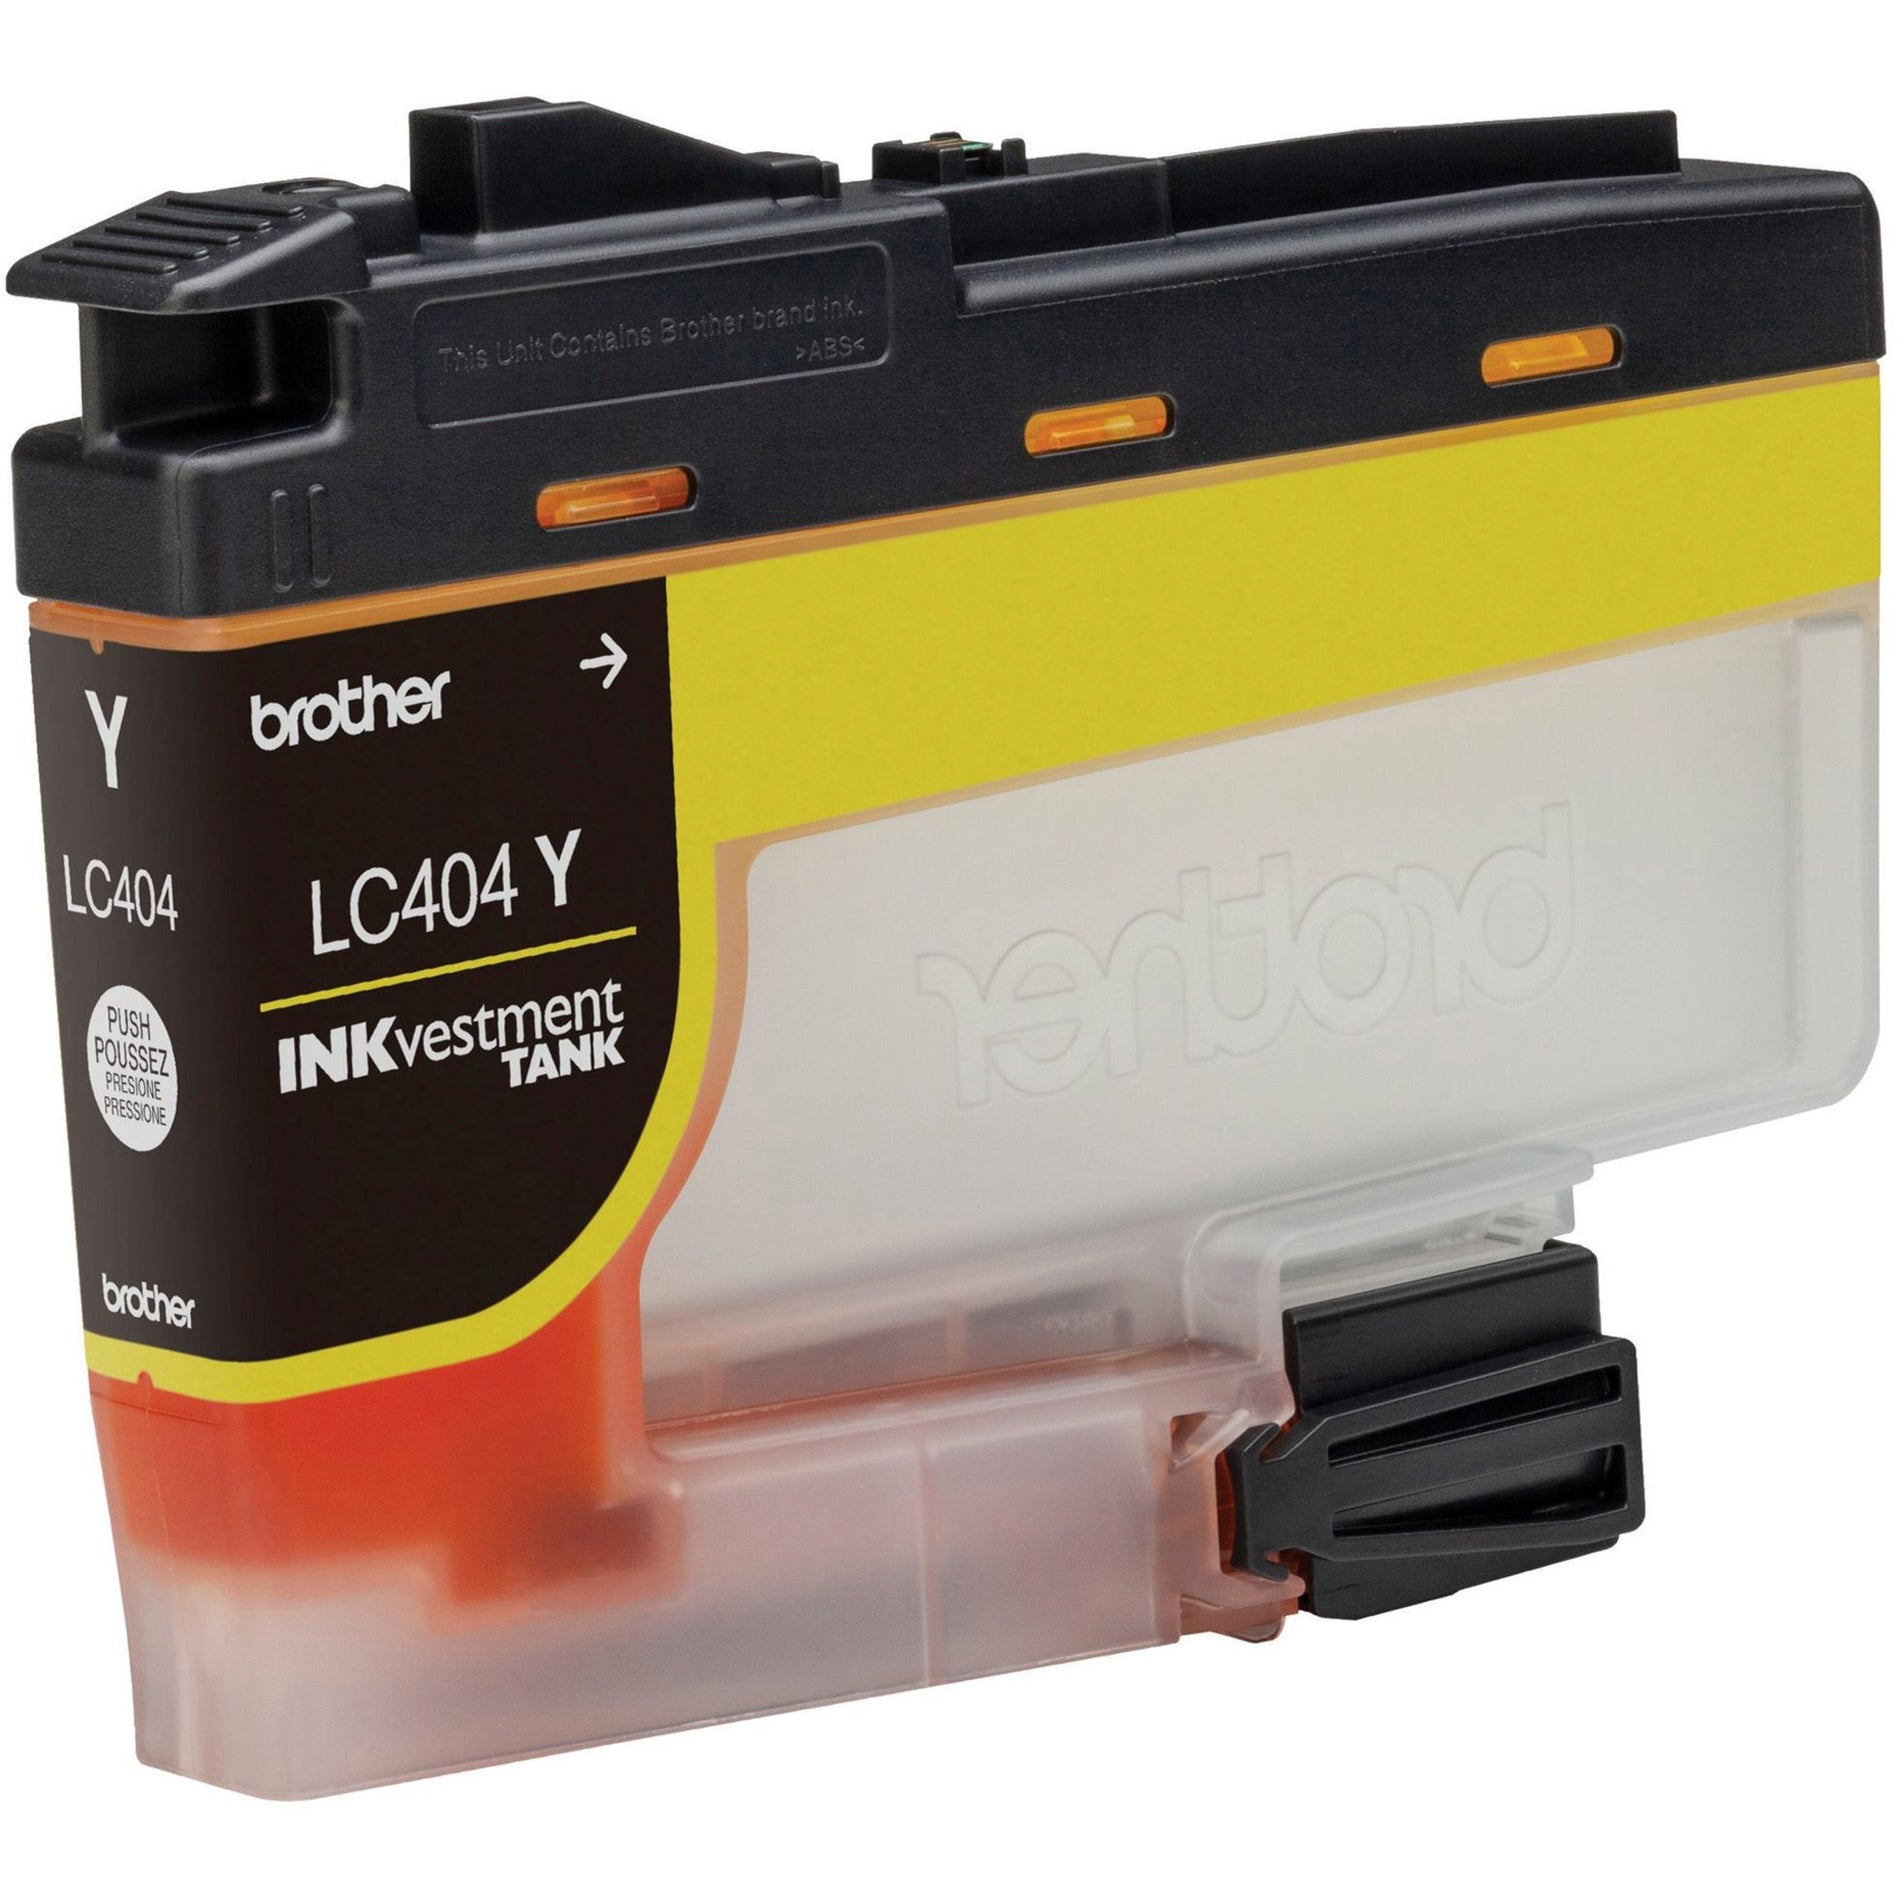 Brother LC404YS LC404Y INKvestment Tank Ink Cartridge, Yellow, 750 Pages